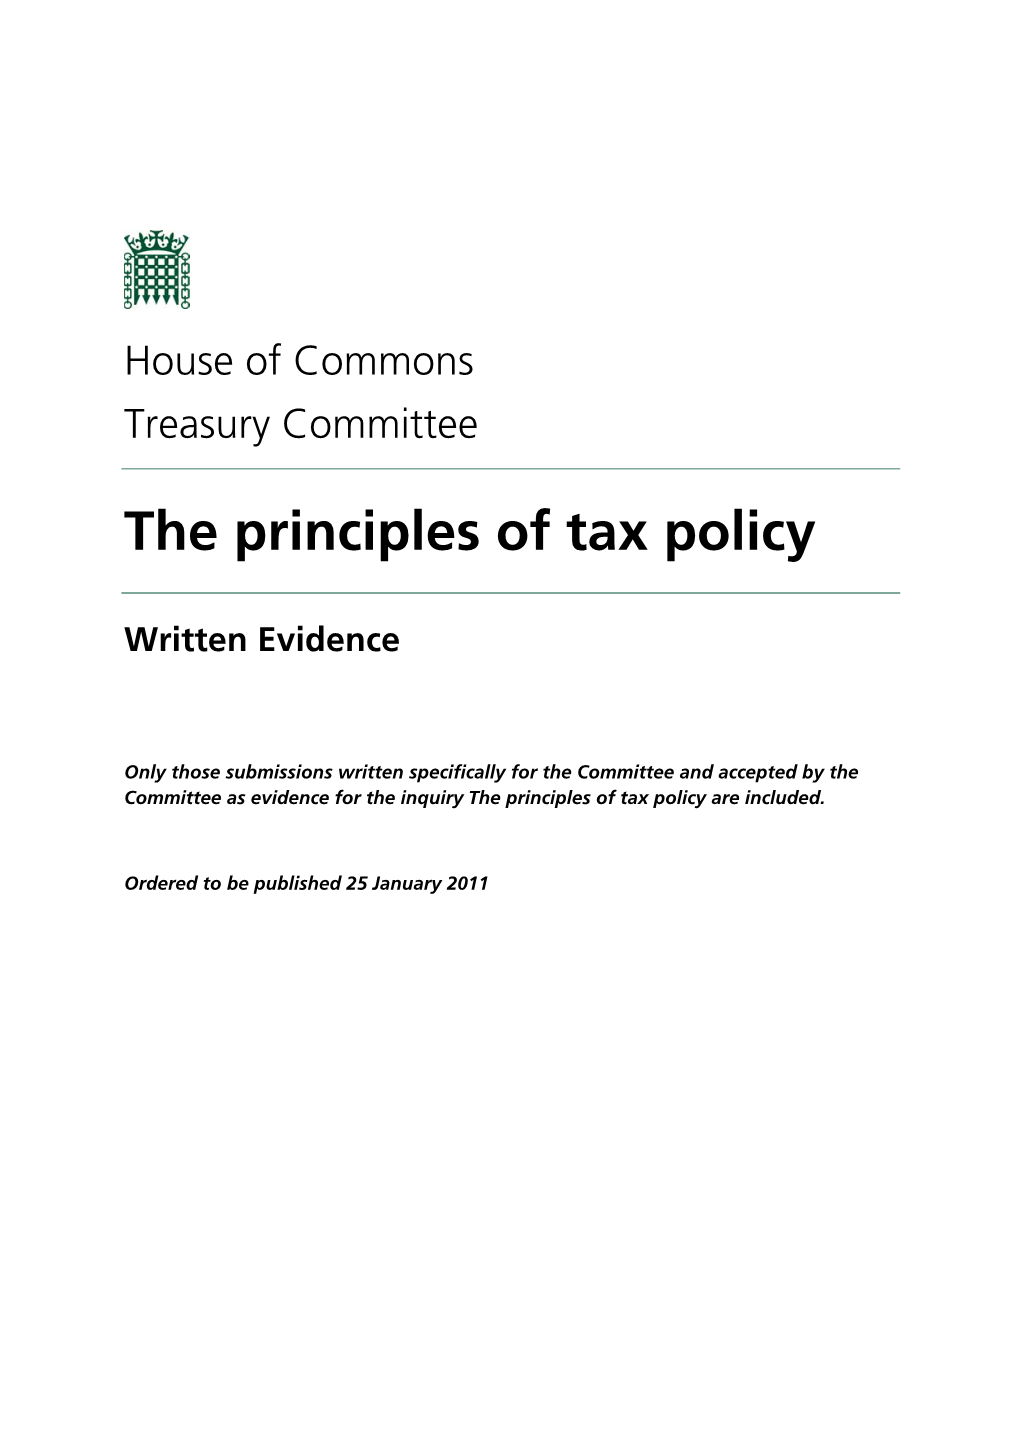 The Principles of Tax Policy